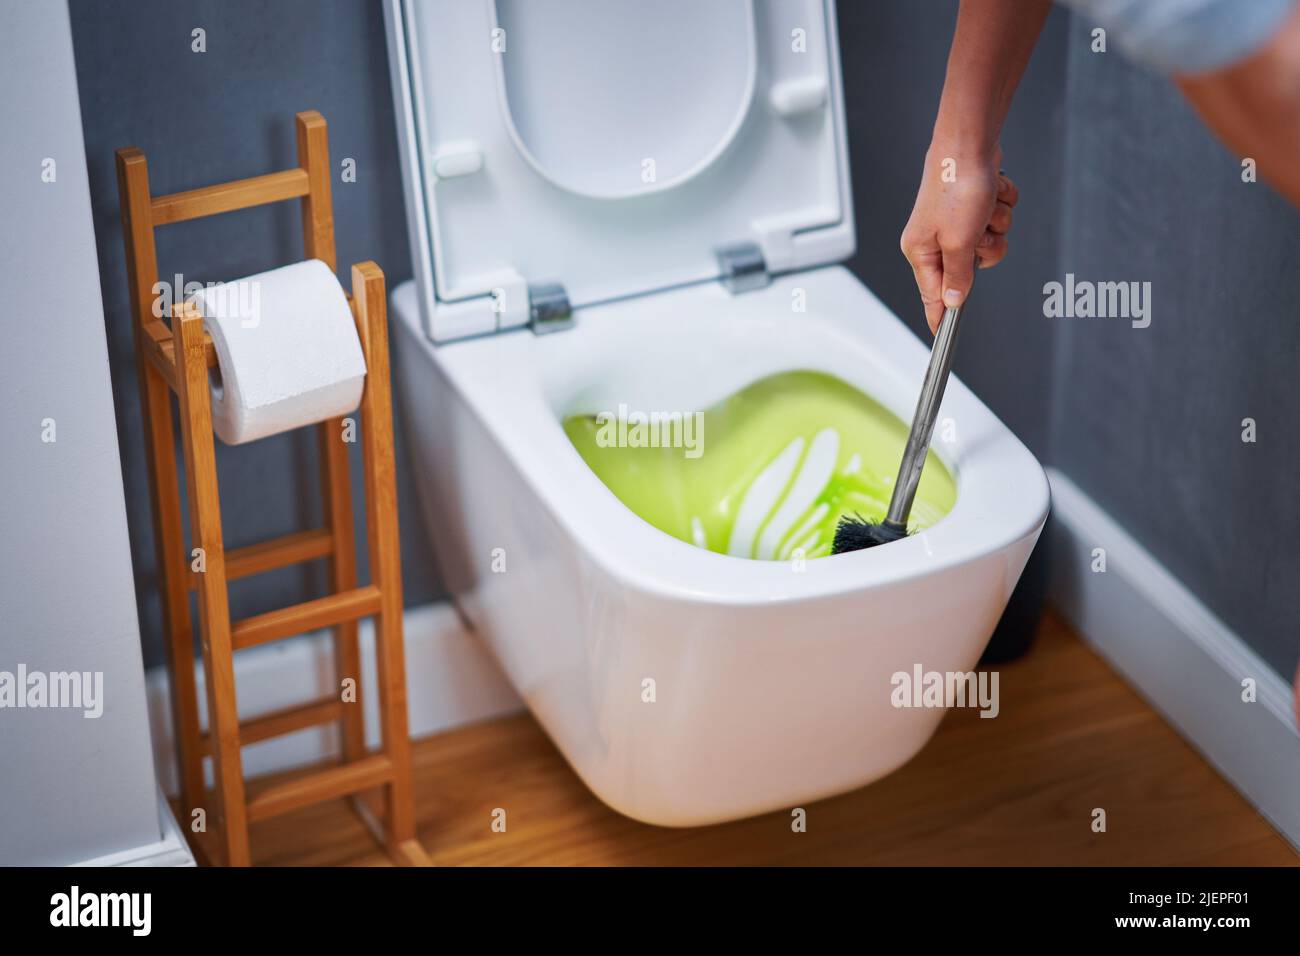 Picture of cleaning toilet seat with chemicals Stock Photo